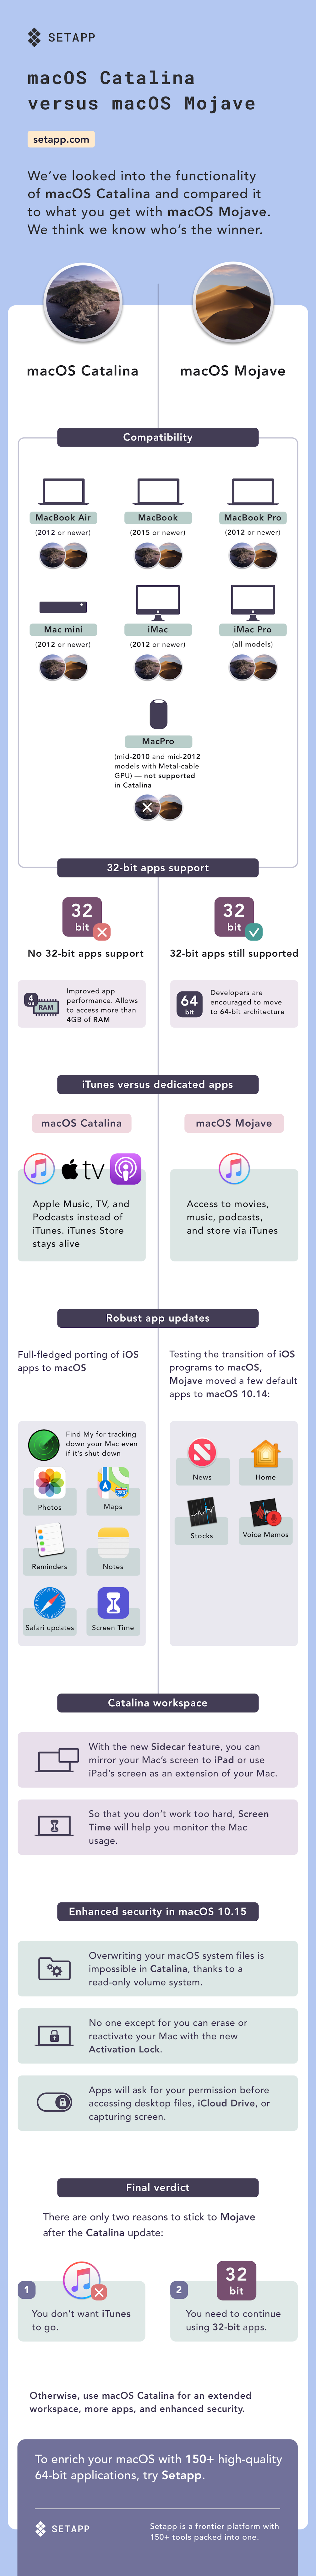 Comparing Macos Catalina To Macos Mojave Infographic